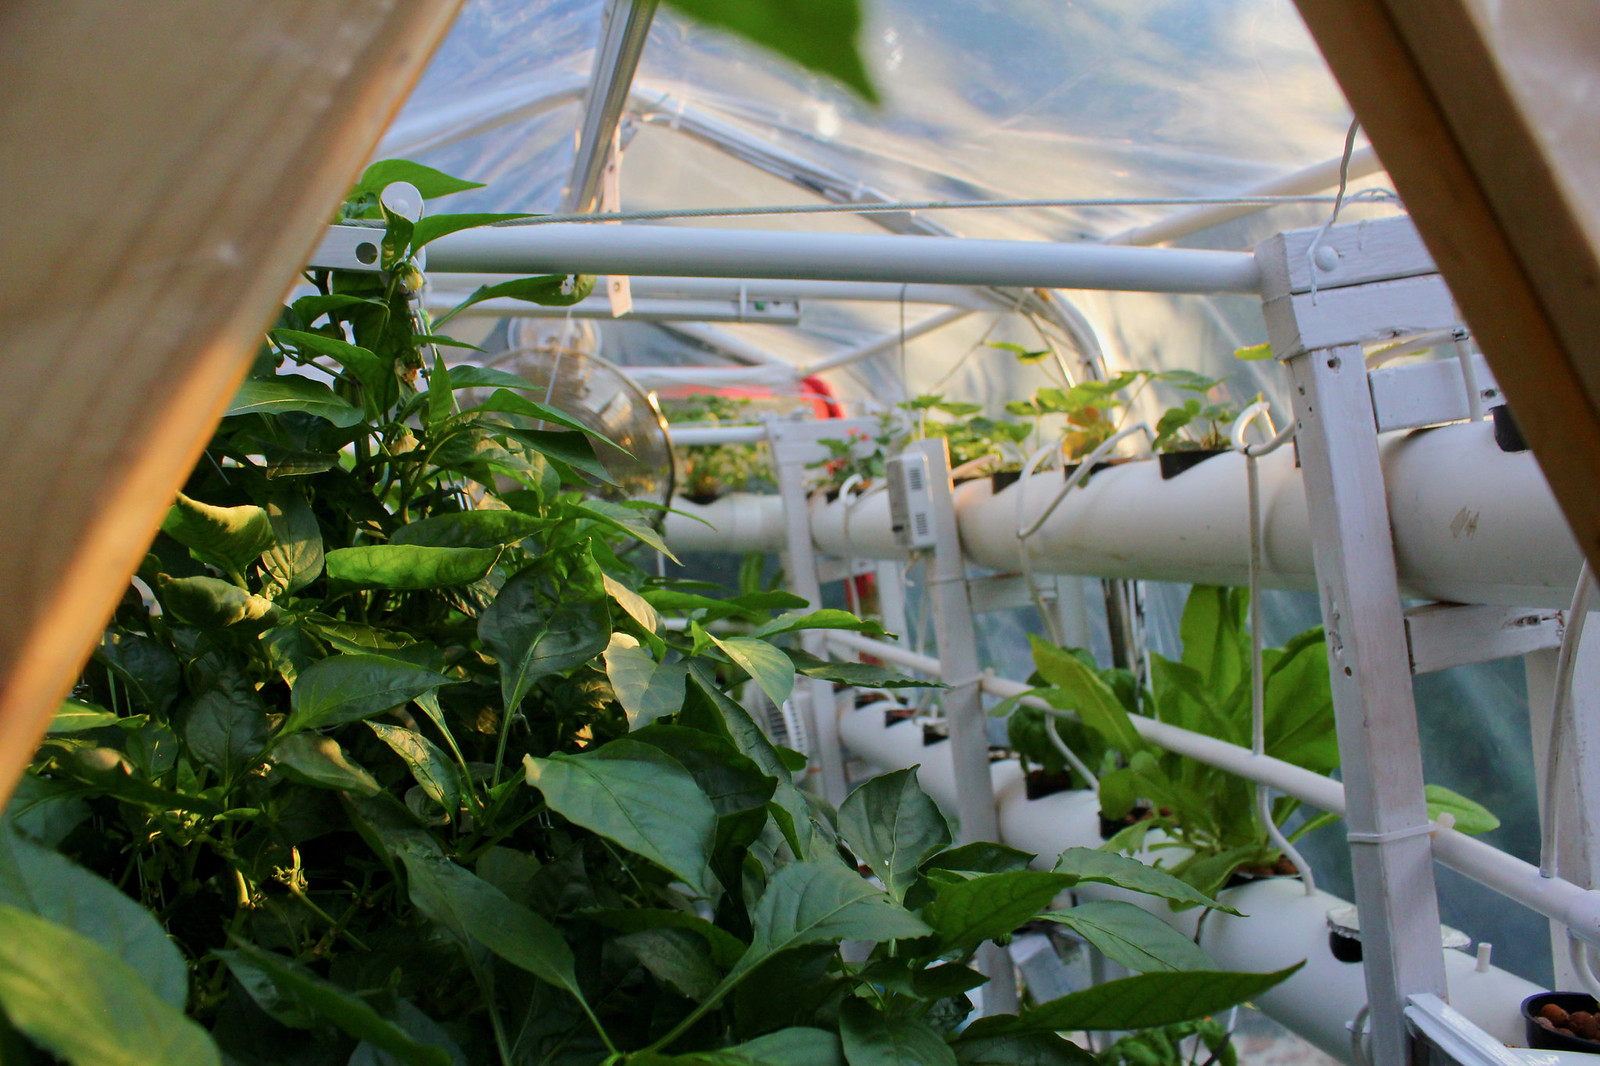 Outdoor HPA and Aeroponics/NFT hybrid